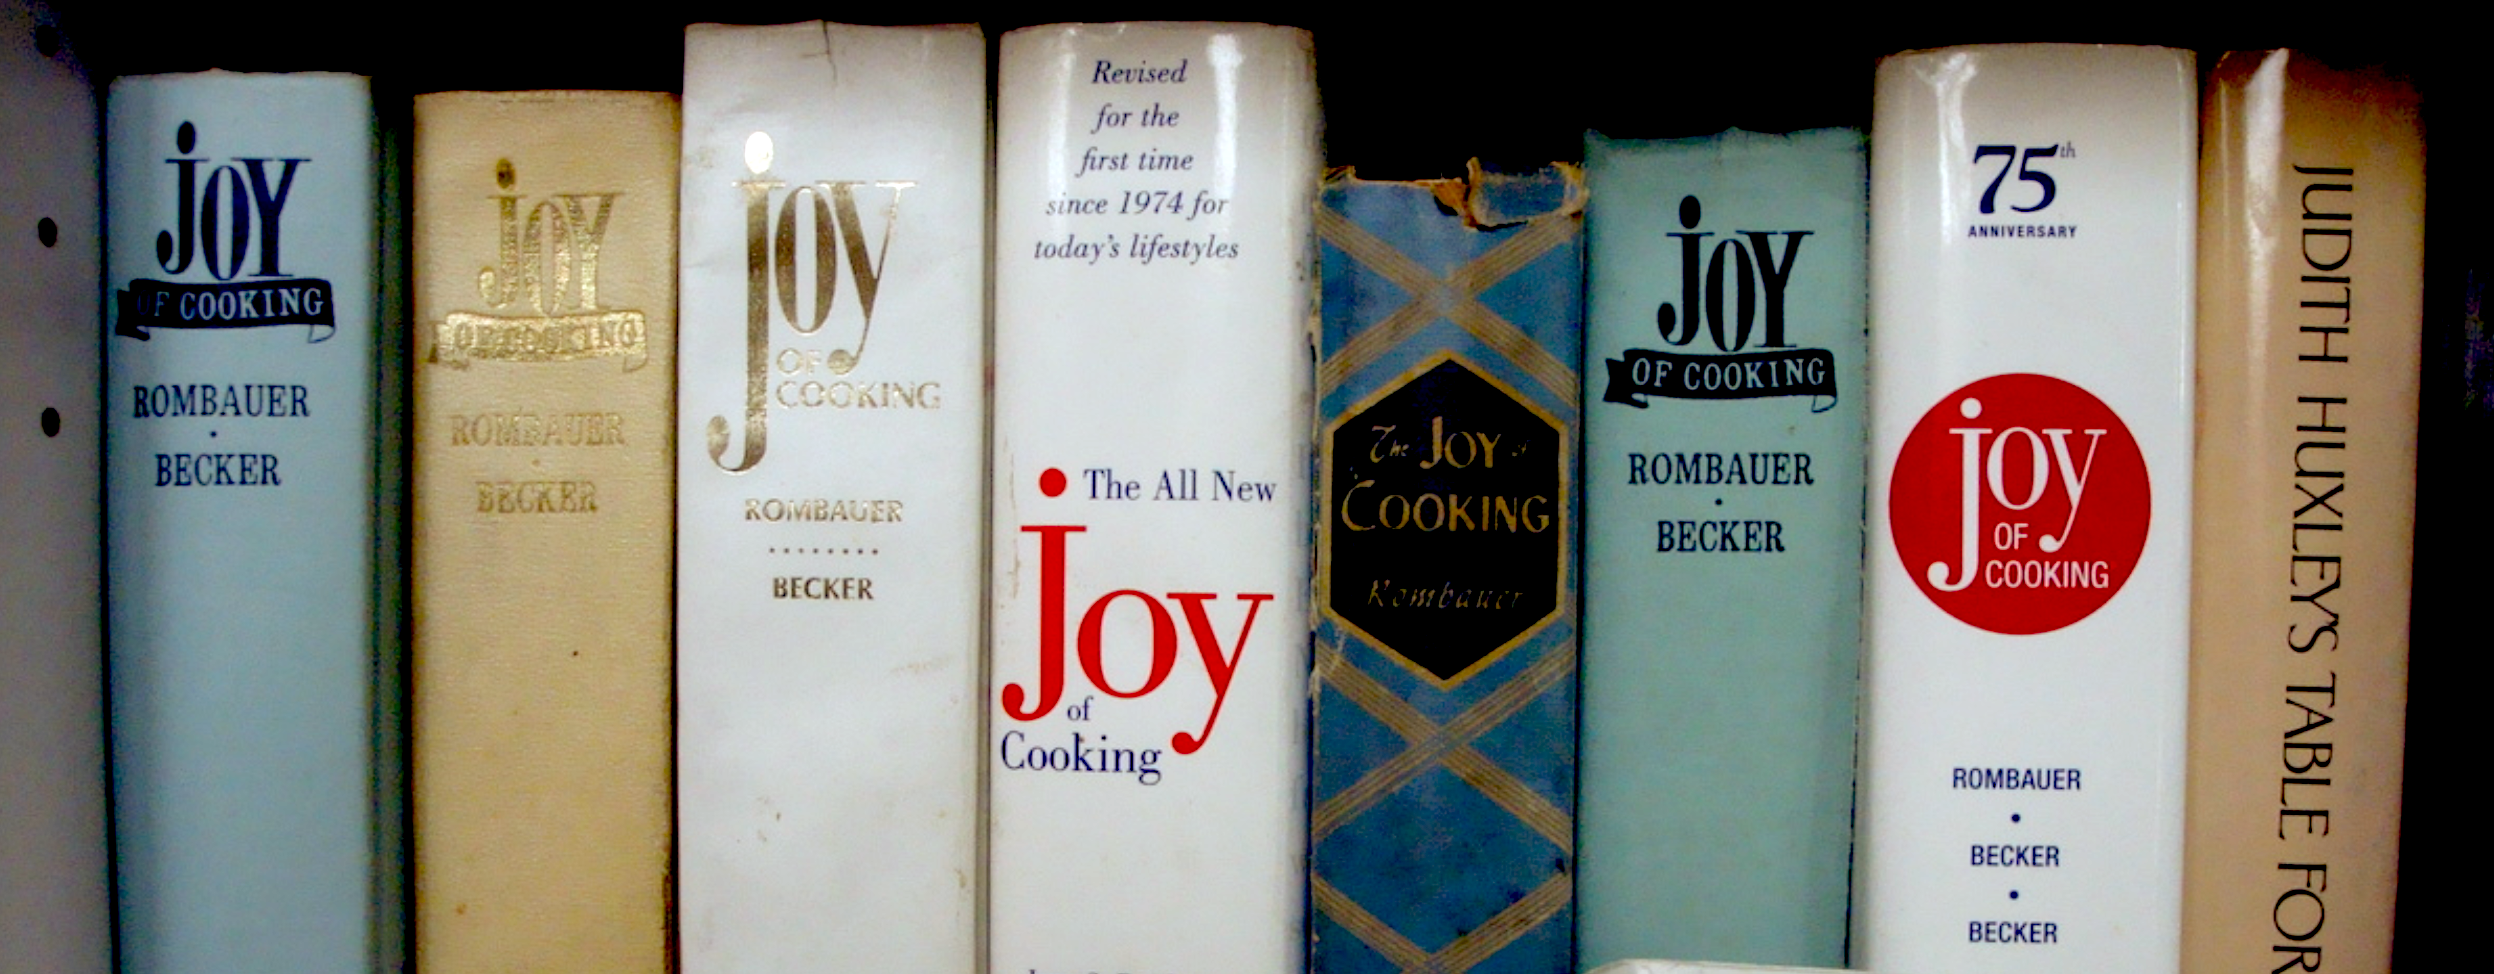 Joy Of Cooking 75th Anniversary Edition Review